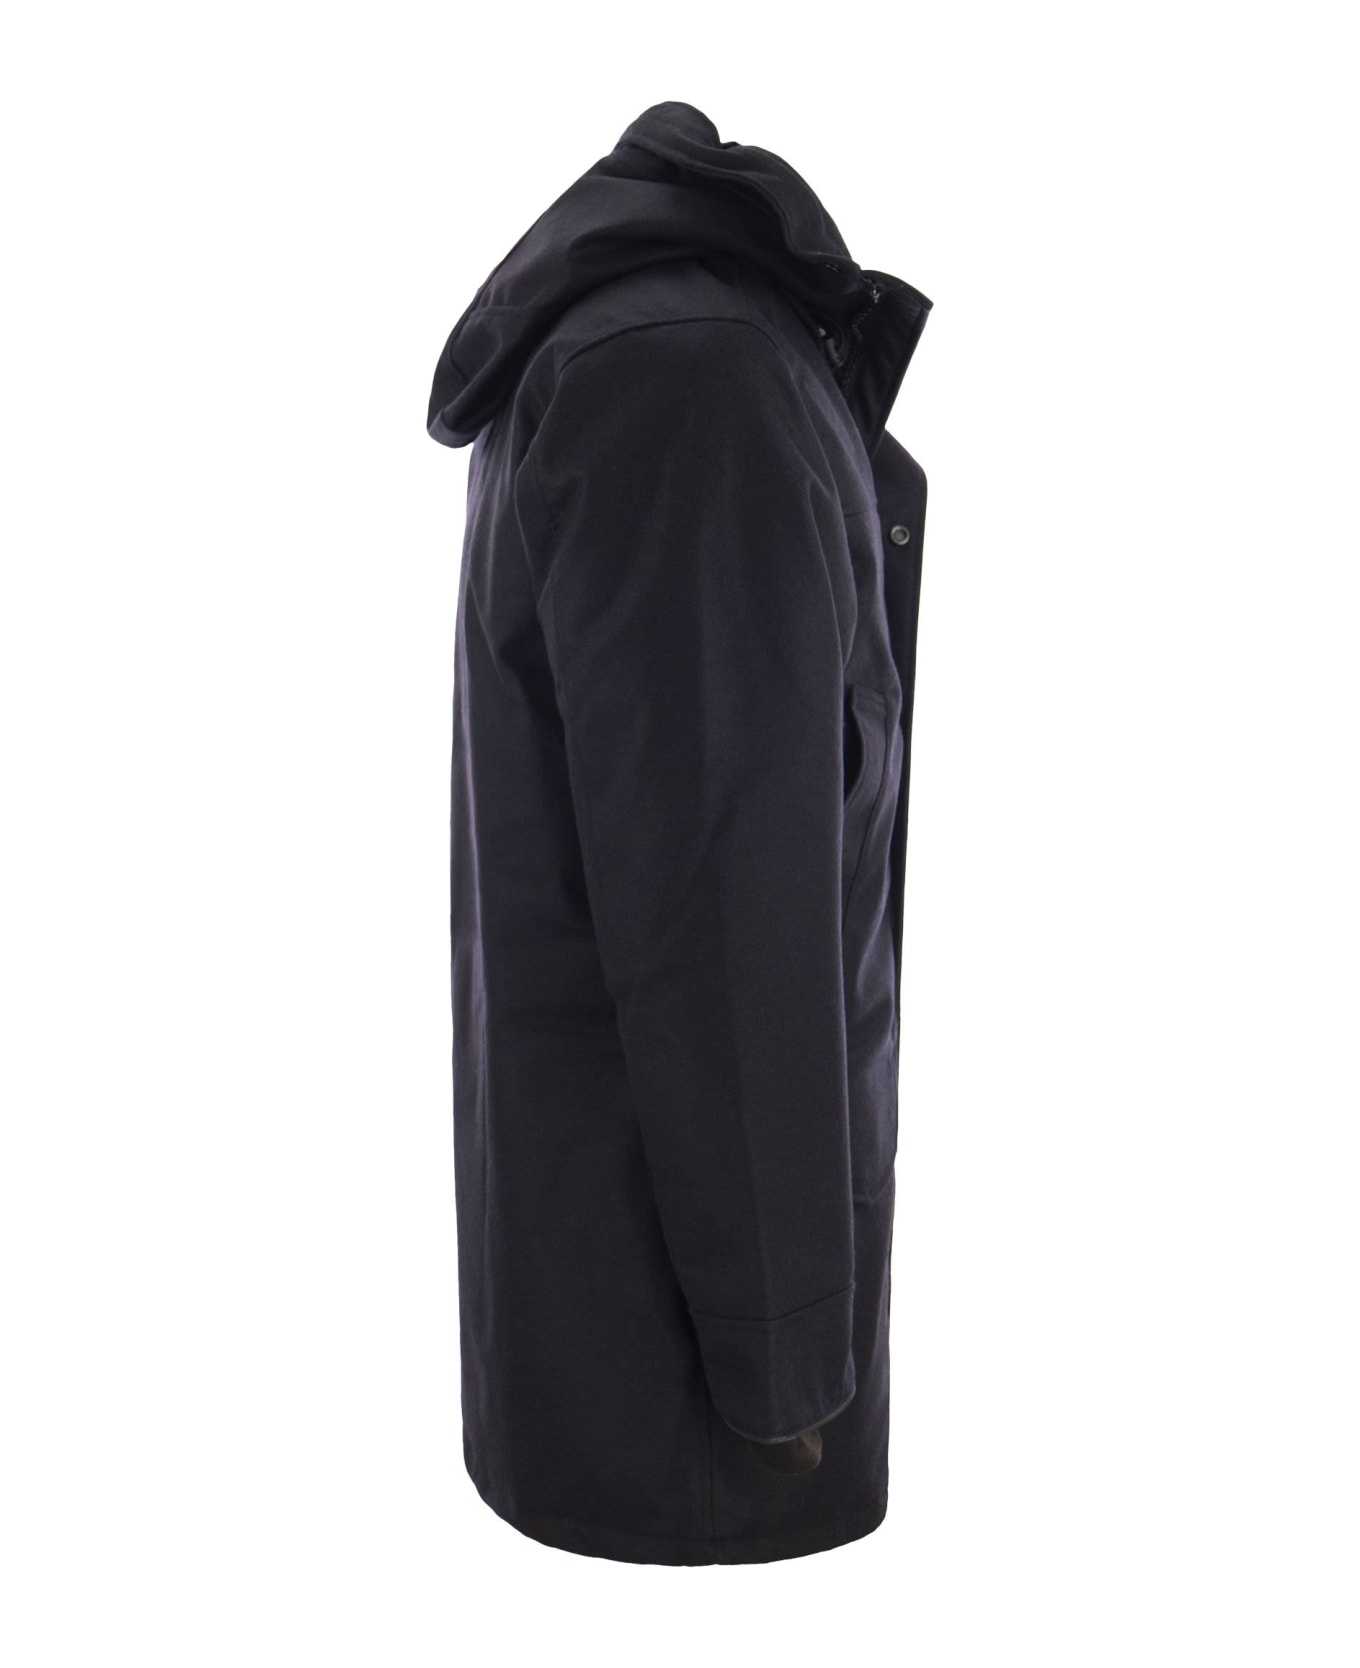 Canada Goose Langford - Hooded Parka - Navy コート